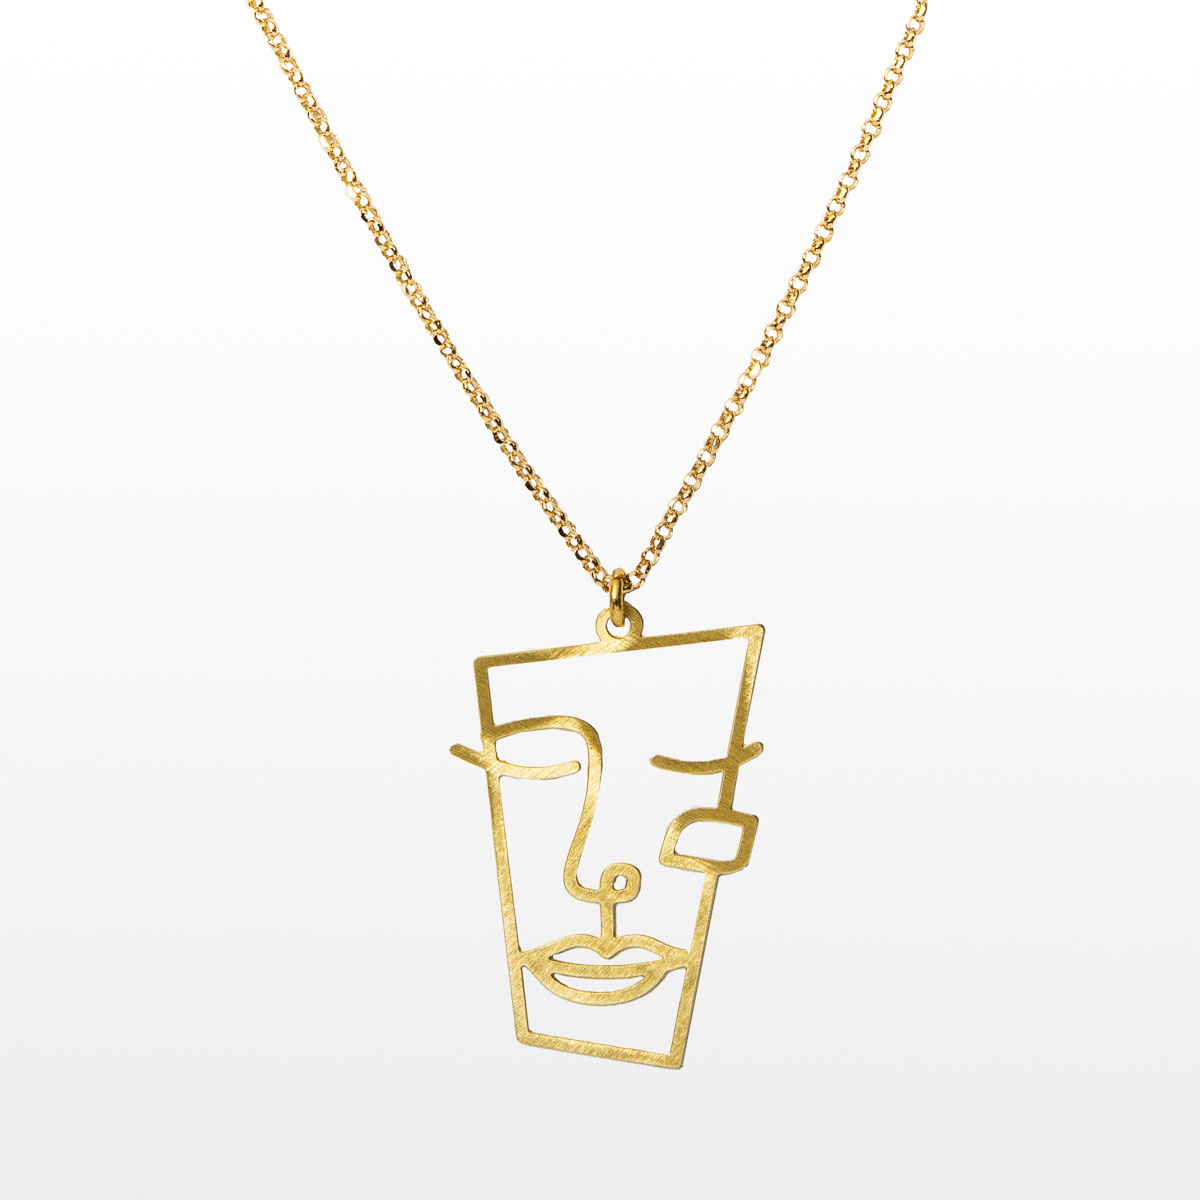 Cubism pendant (gold or silver finish) - Gold finish